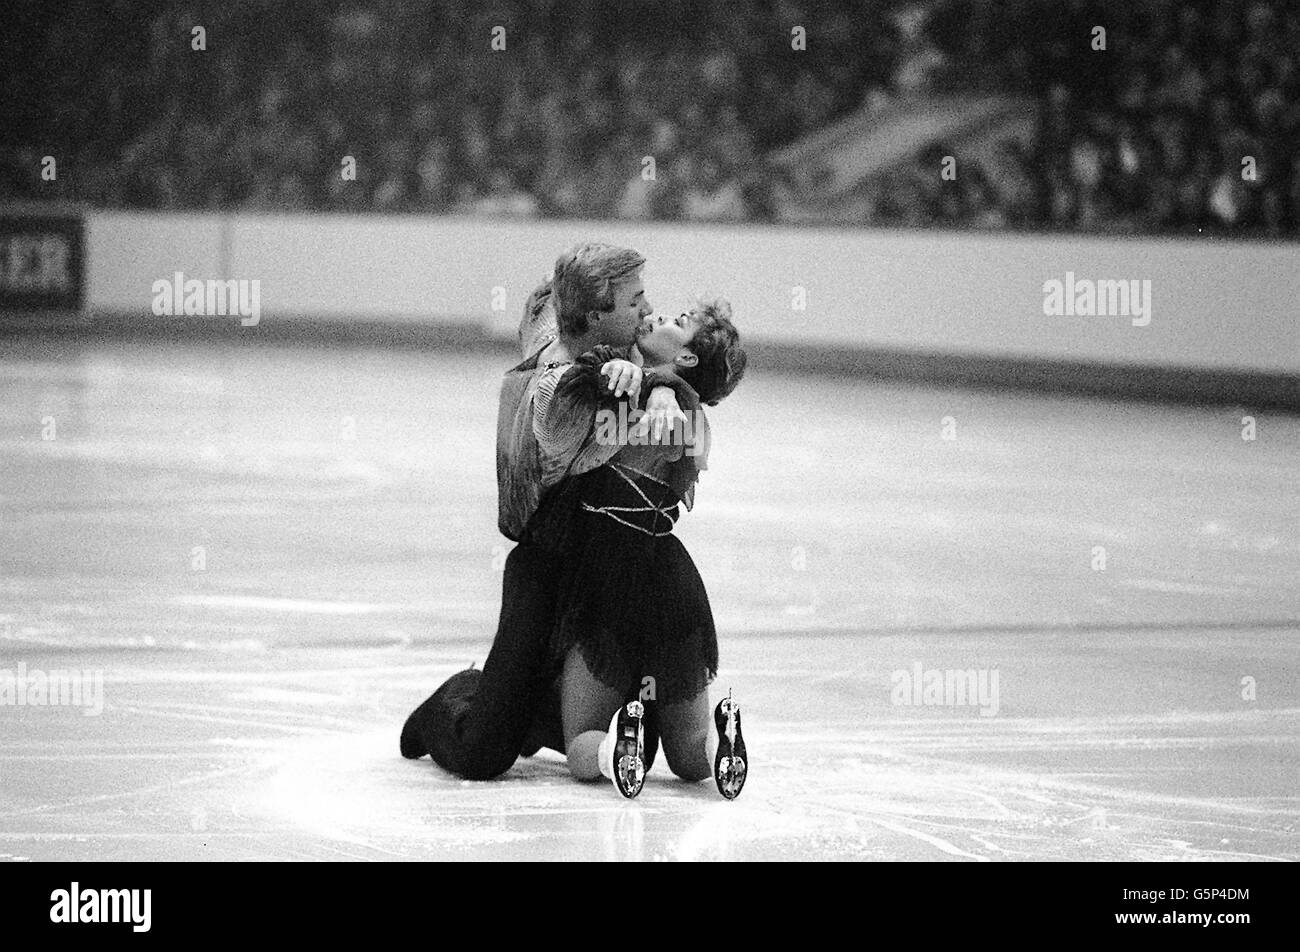 14TH FEBRUARY : On this day in 1984 Jayne Torvill and Christopher Dean won gold for ice dancing at the Sarajevo Olympics. World and British ice dance champions Jayne Torvill and Christopher Dean during their Bolero routine, which they won the British championships for the sixth time in November 1983 and again in the closing ceremony in the 1984 Euro Championships. 26/11/2003 Olympic gold medal winner Jayne Torvill was, Wednesday November 26, 2003, launching the fourth annual Somerset House ice rink in London. The popular Christmas attraction will be officially opened in a gala evening Stock Photo